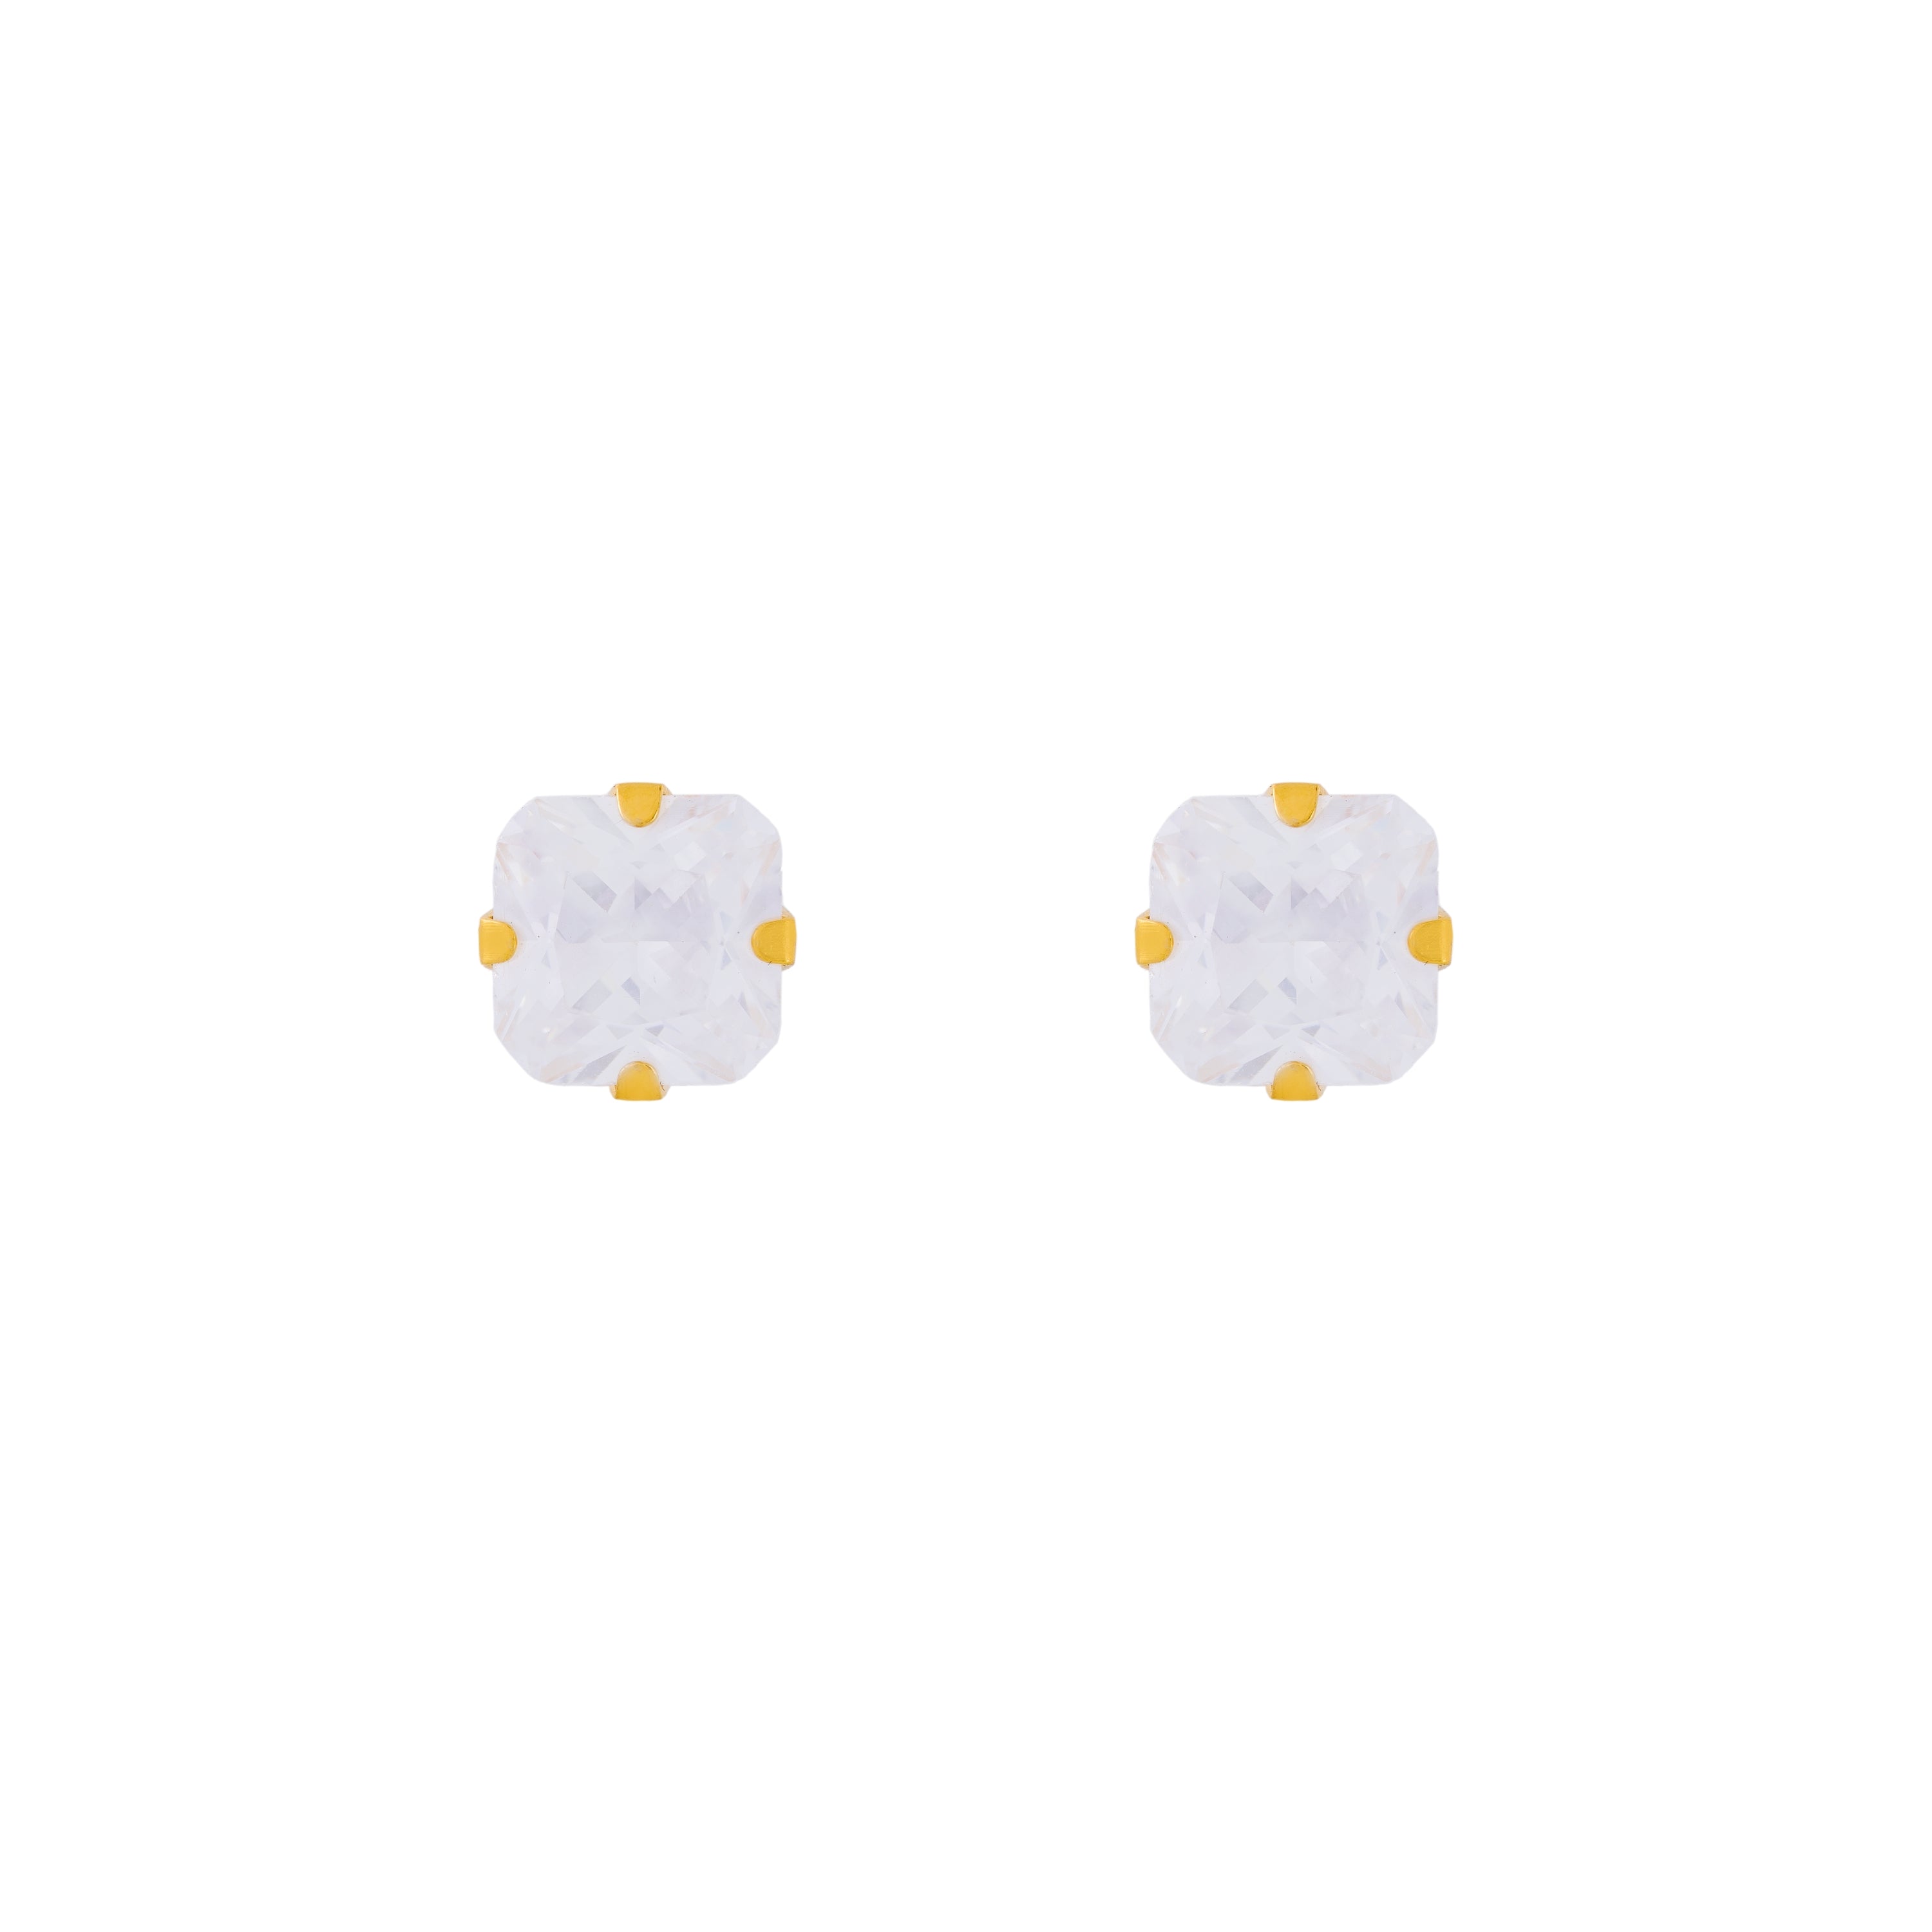 7X7MM Cubic Zirconia Princess Cut 24K Pure Gold Plated Ear Studs | MADE IN USA | Ideal for everyday wear